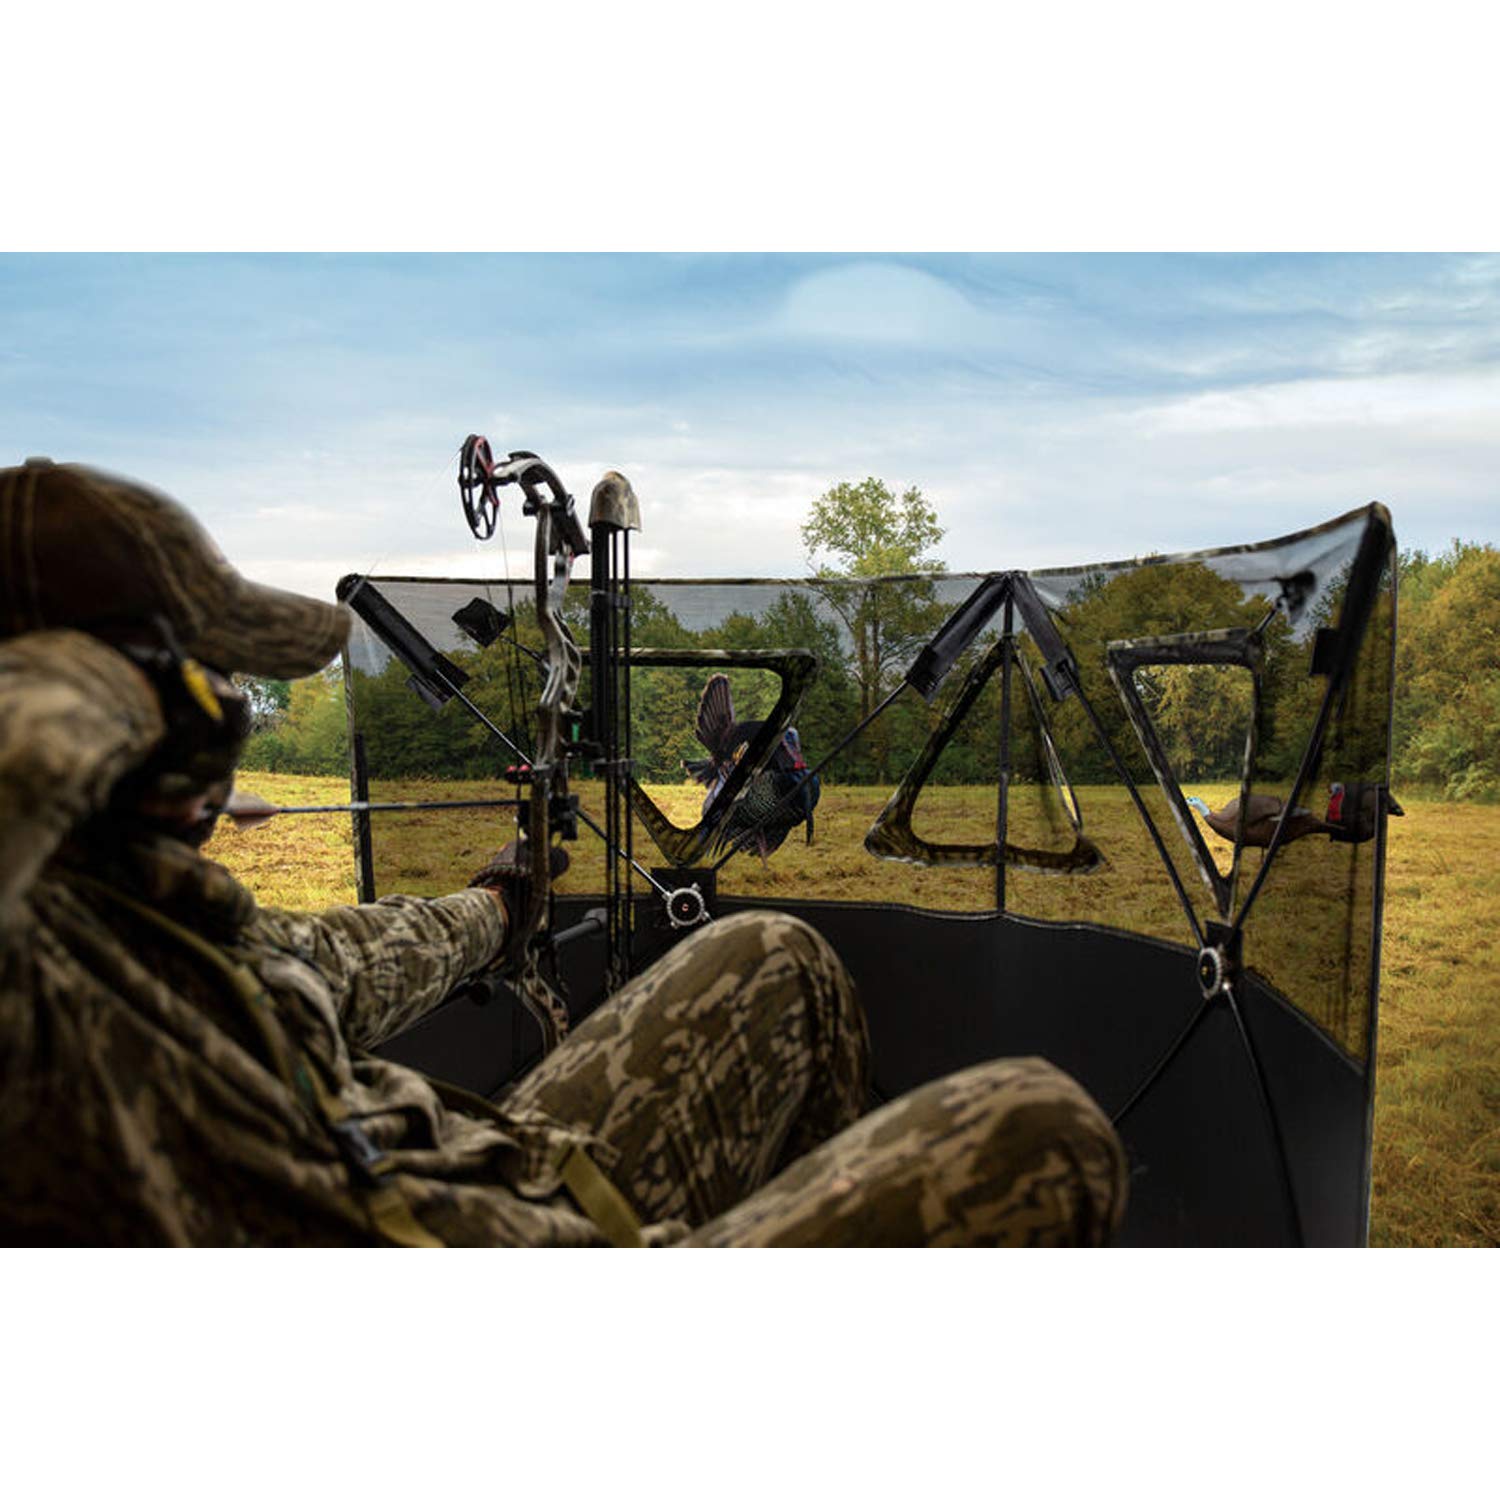 Primos Hunting Double Bull Stakeout Blind with SurroundView, Portable with Carry Bag in Truth Camo 65158